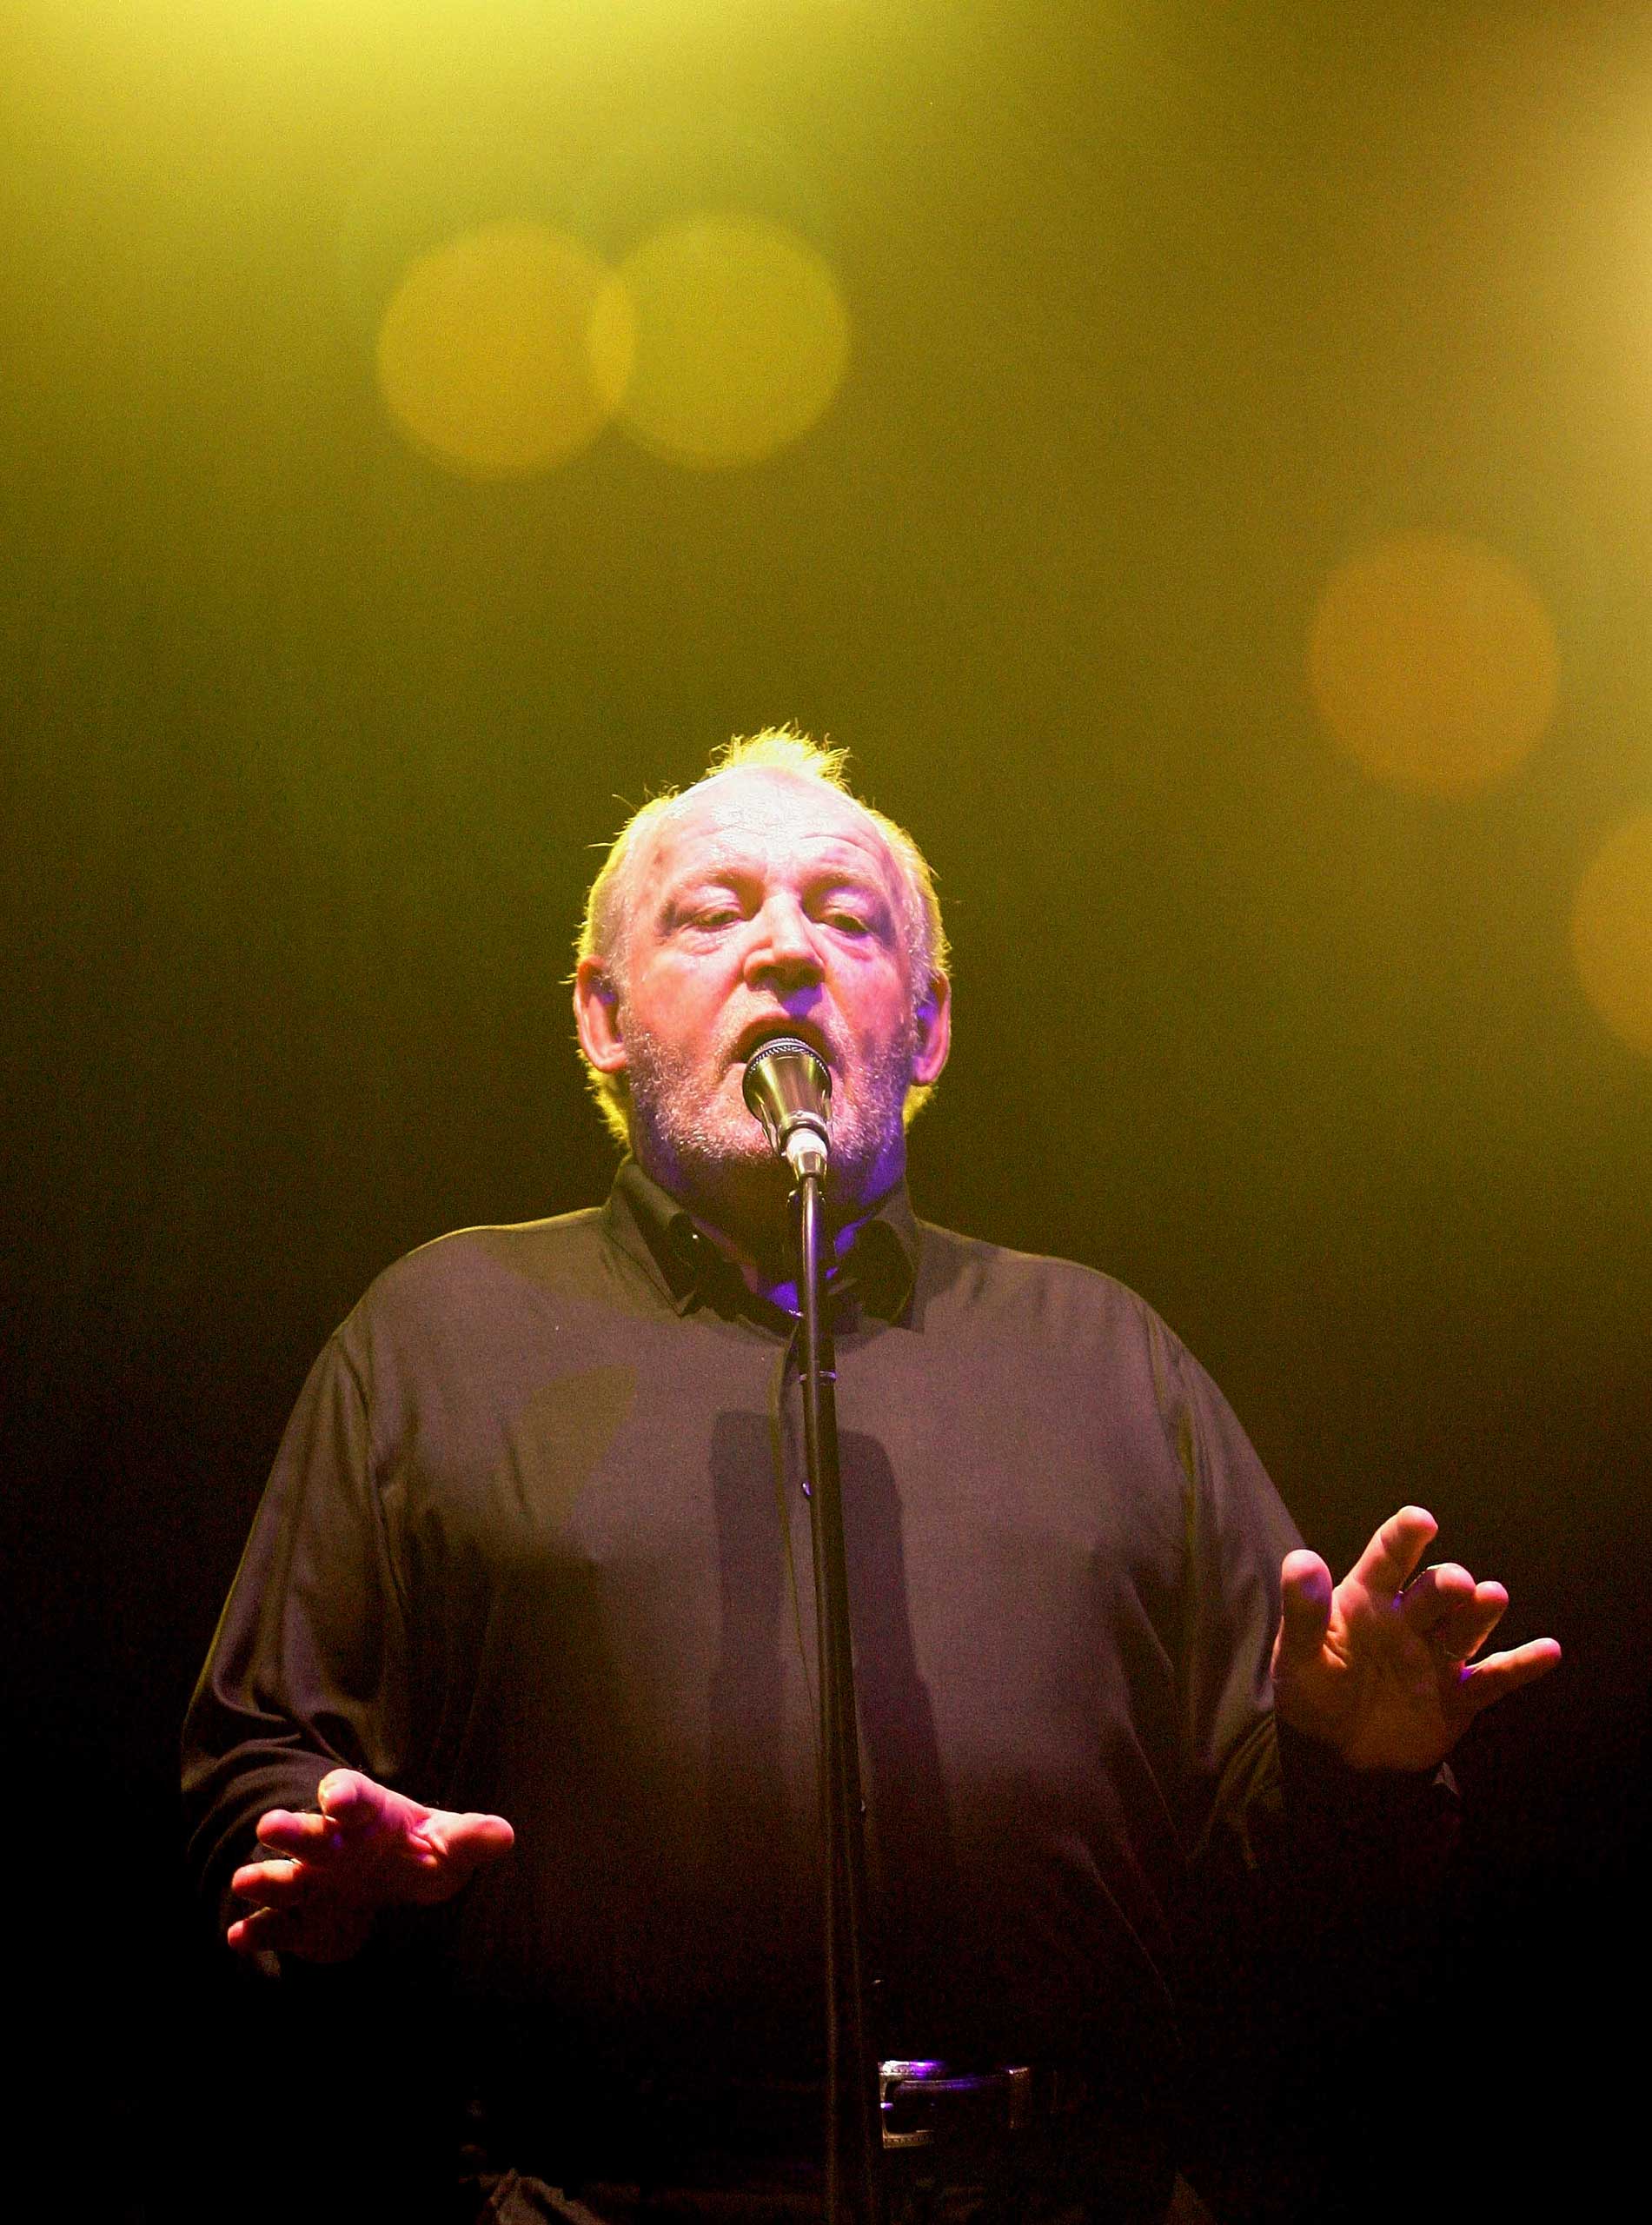 Joe Cocker performs on stage at the State Theatre on Feb. 6, 2008 in Sydney, Australia.